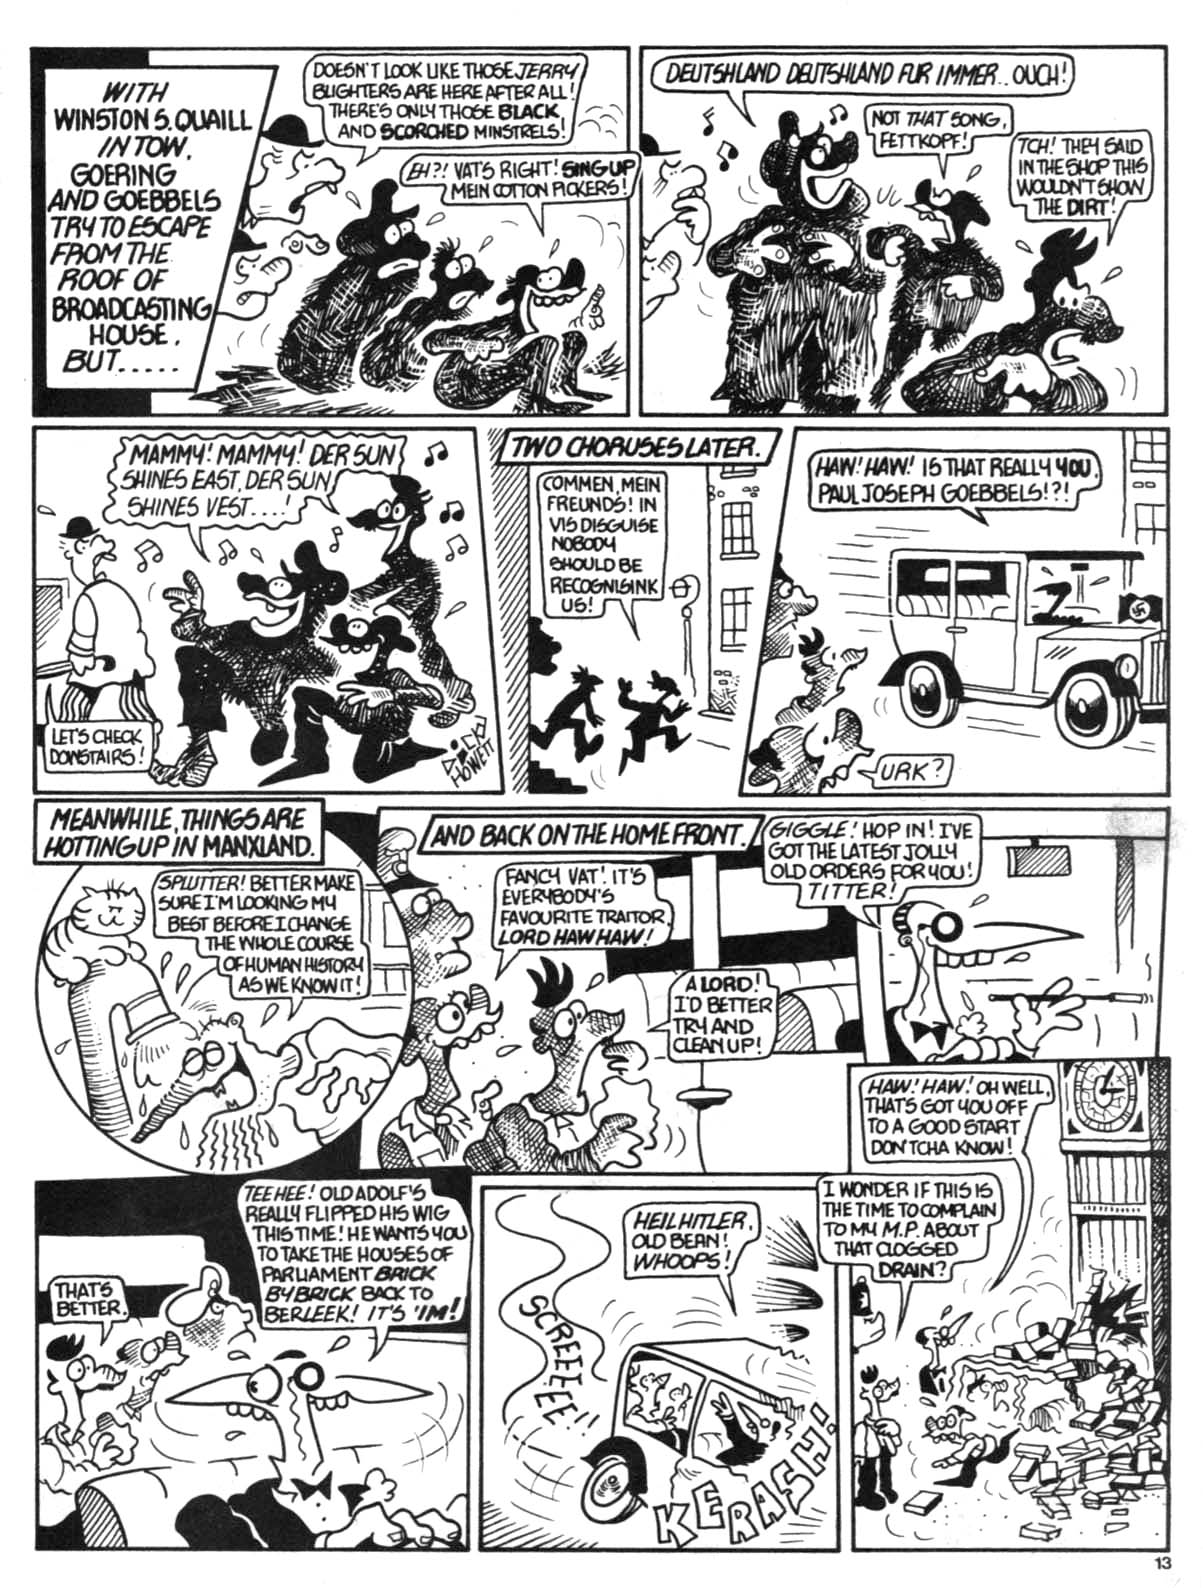 Read online Channel 33 1/3 comic -  Issue # Full - 13